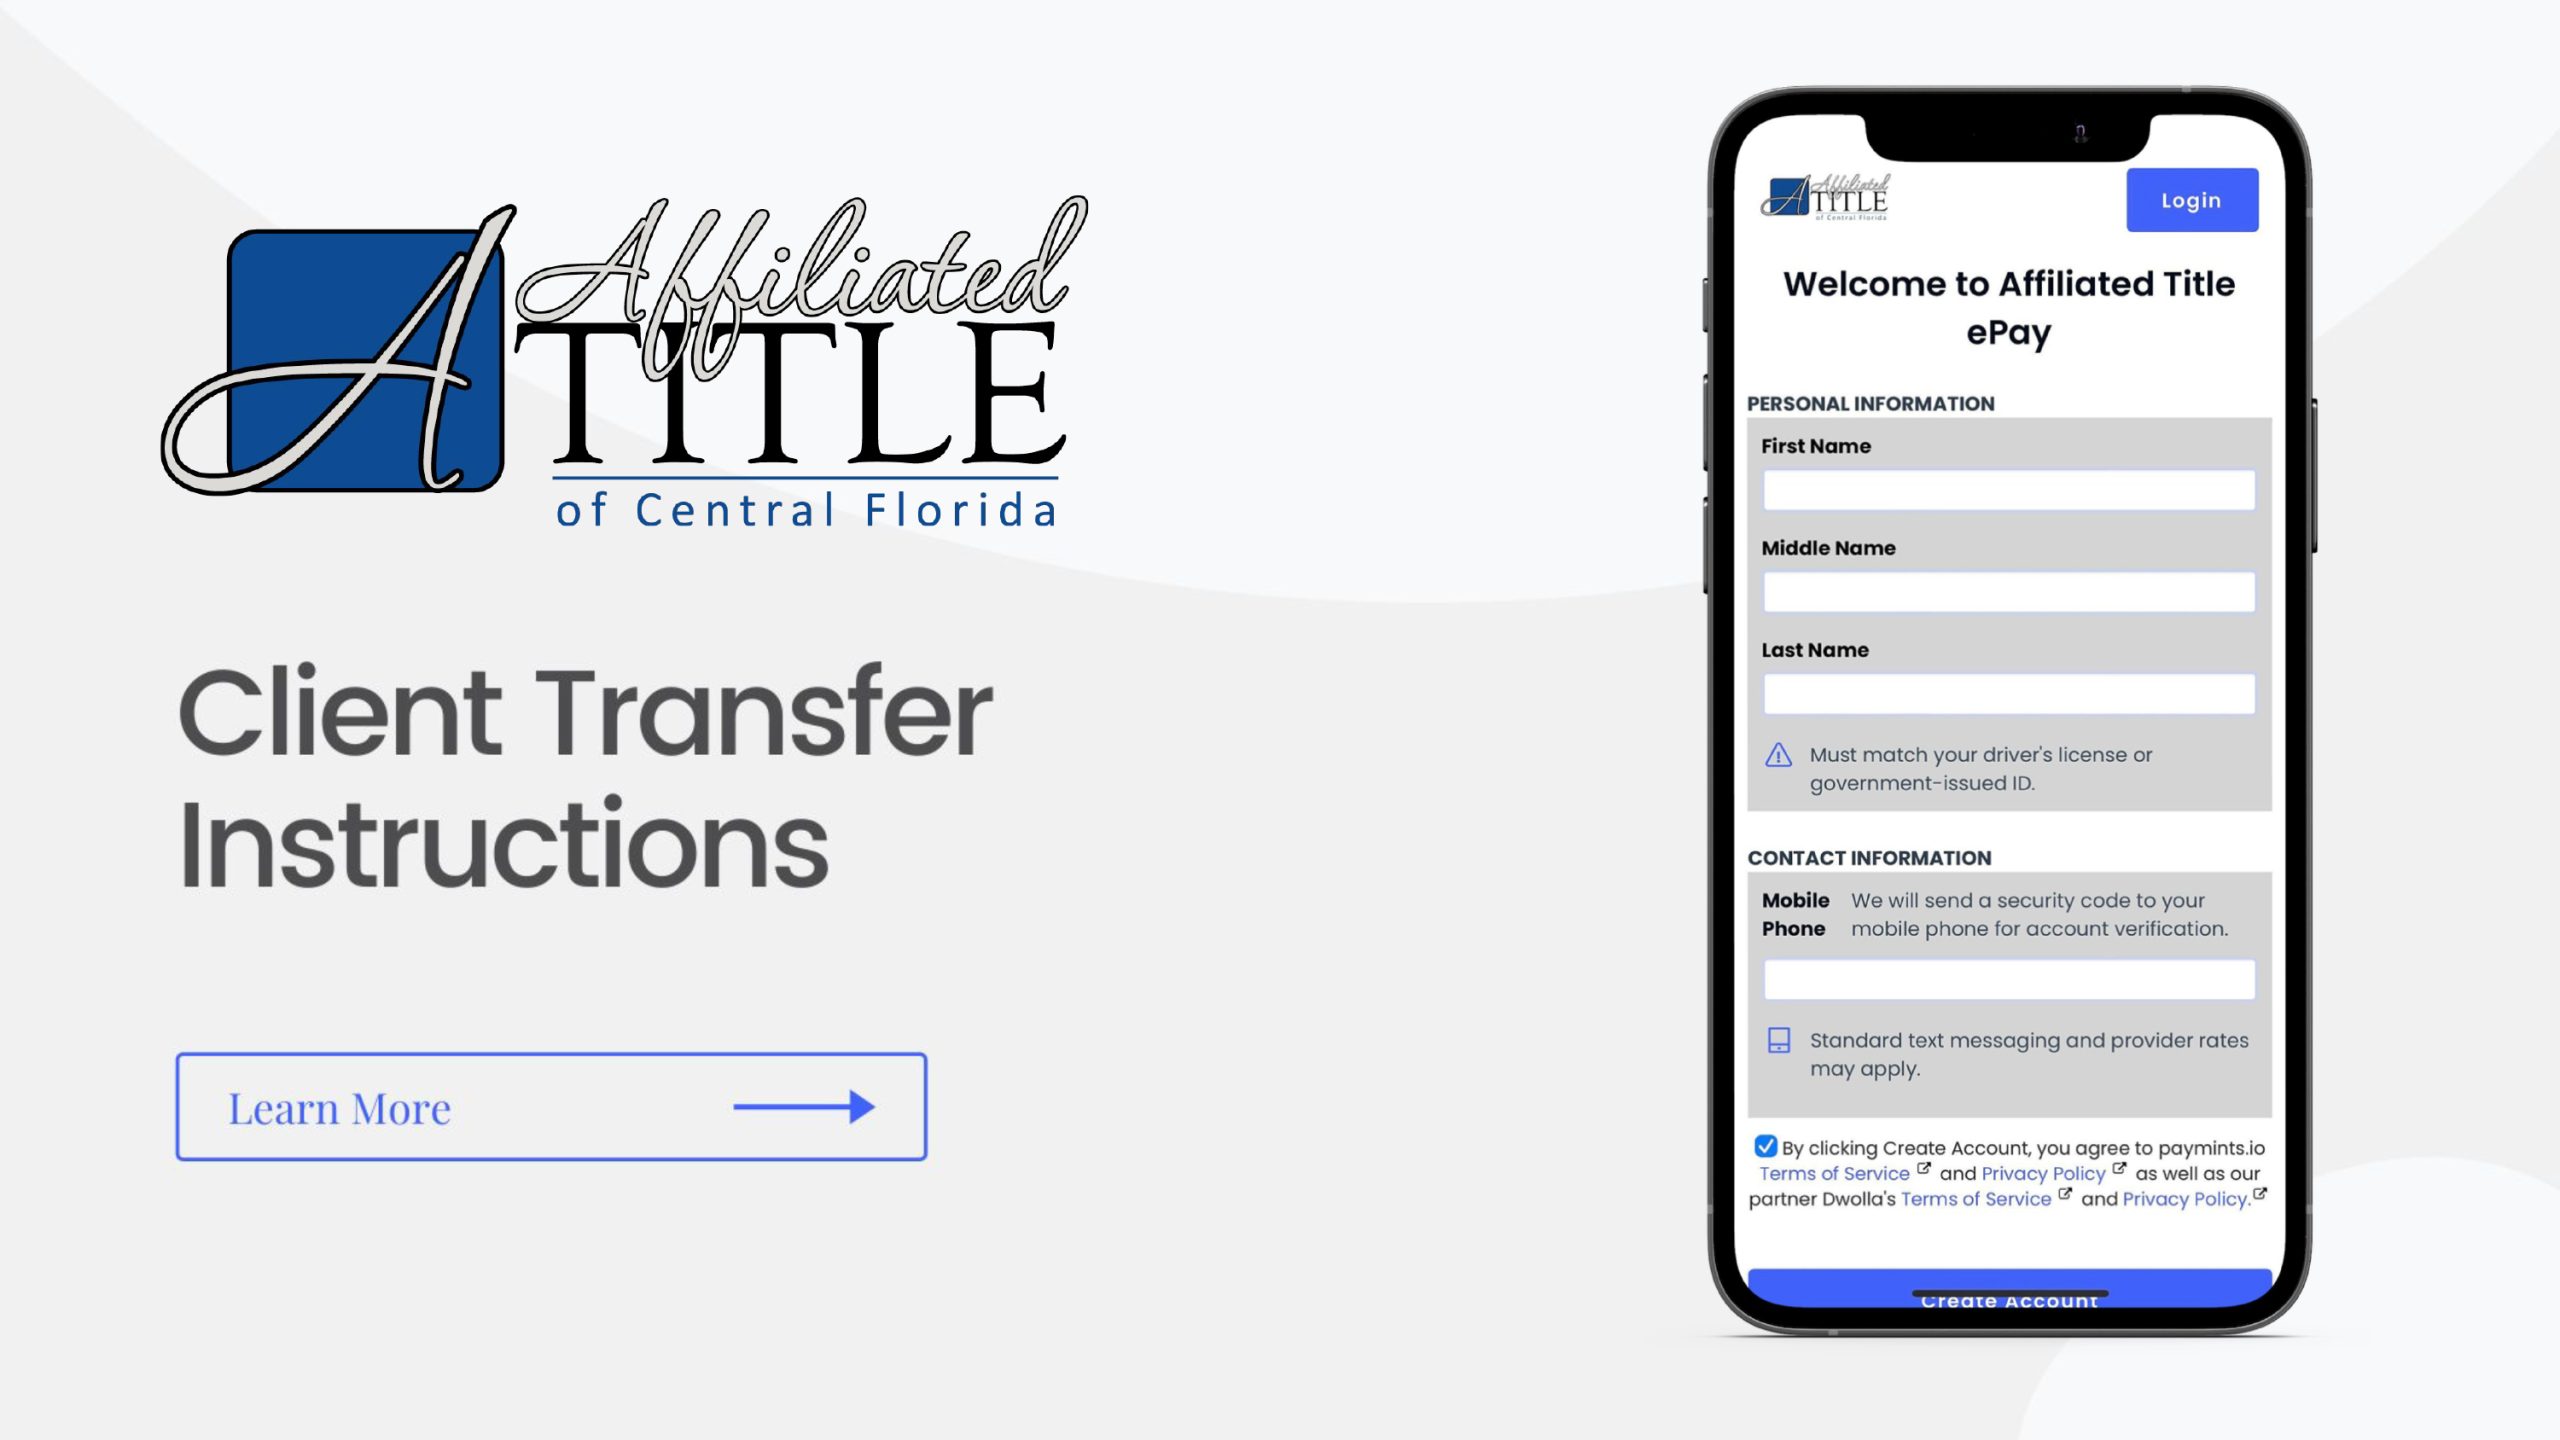 Affiliated Title ePay Client Transfer Instructions 1